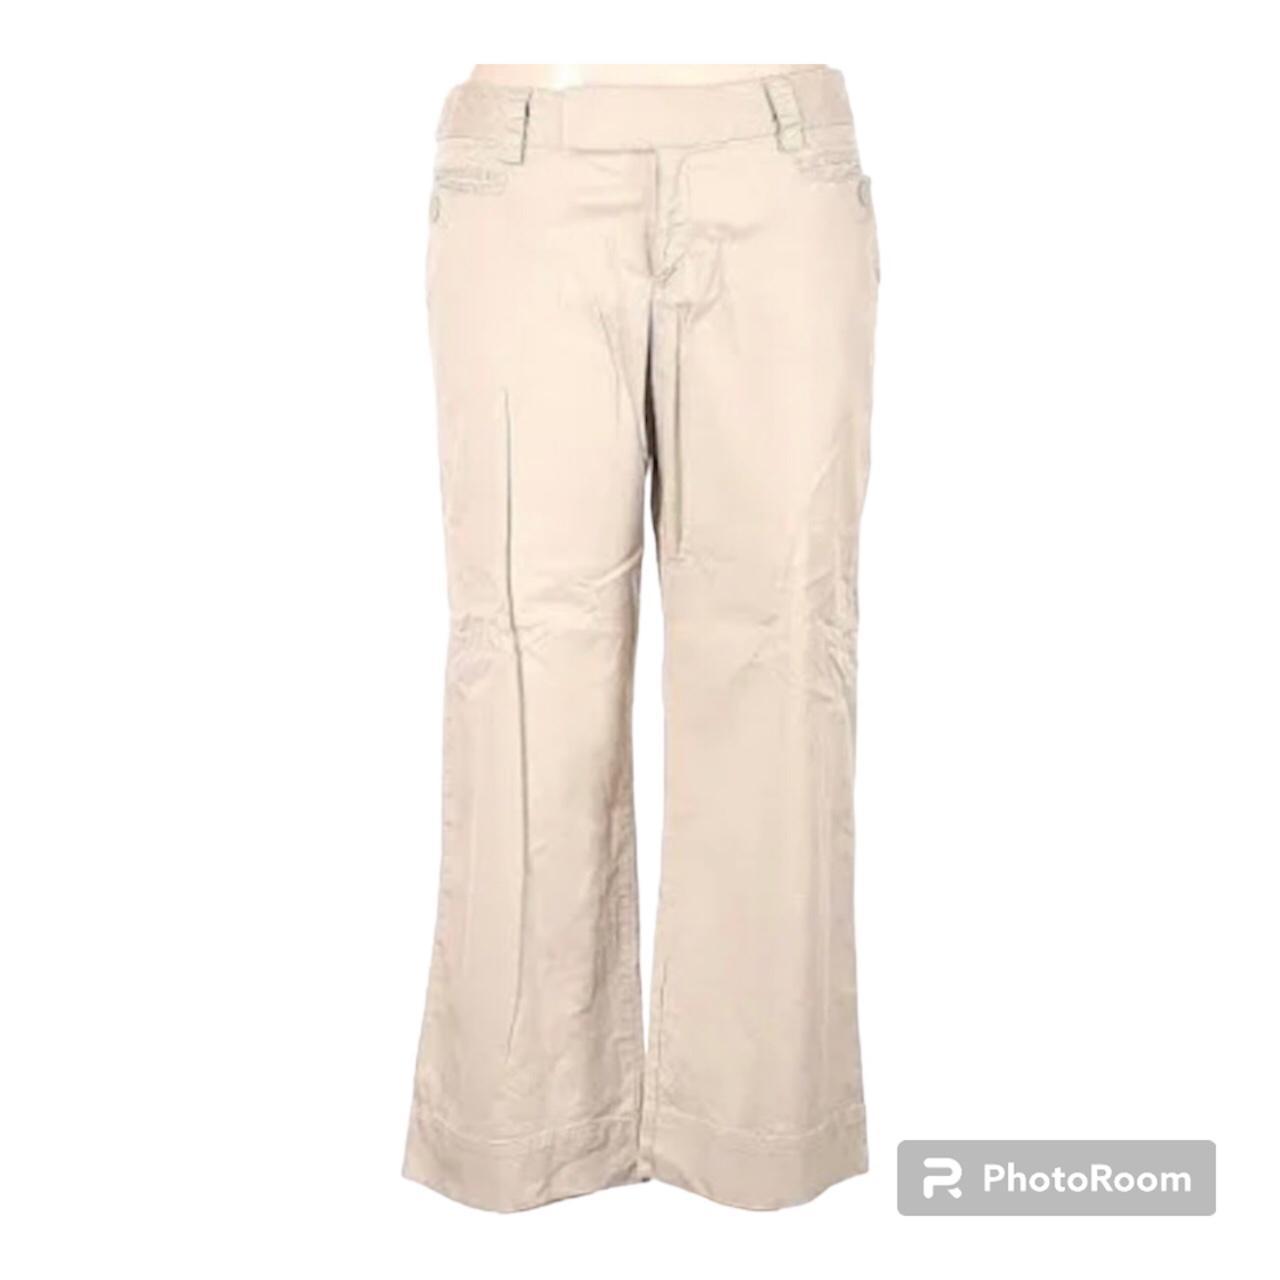 Mossimo Flared Cotton Stretch Pants Beige Size 14 - Depop